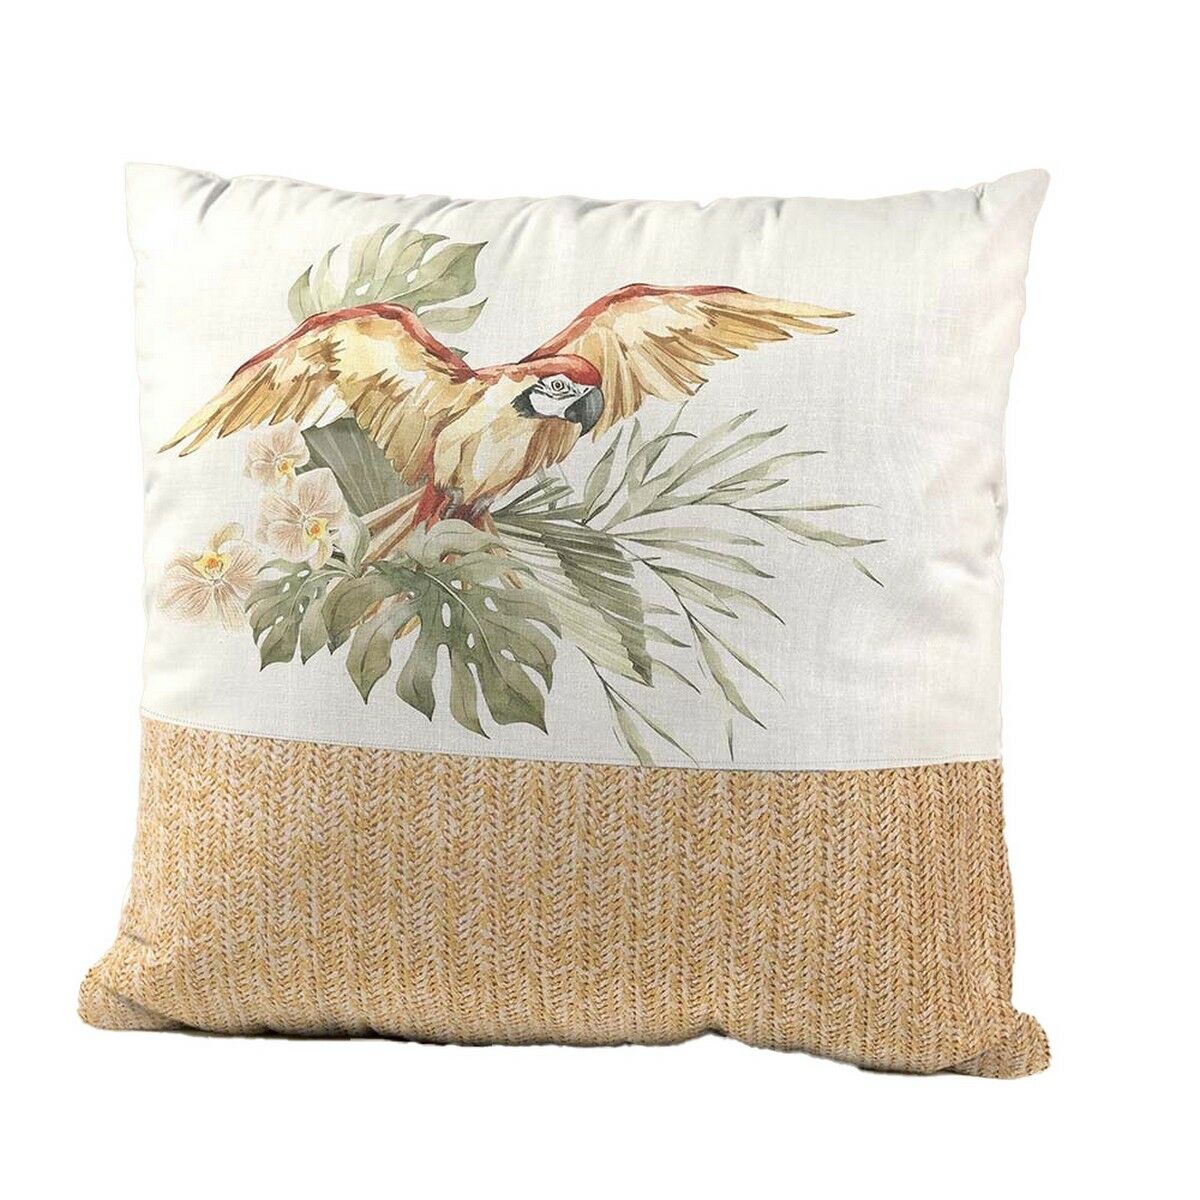 White Craft Cushion with Parrot (45 x 45 cm)